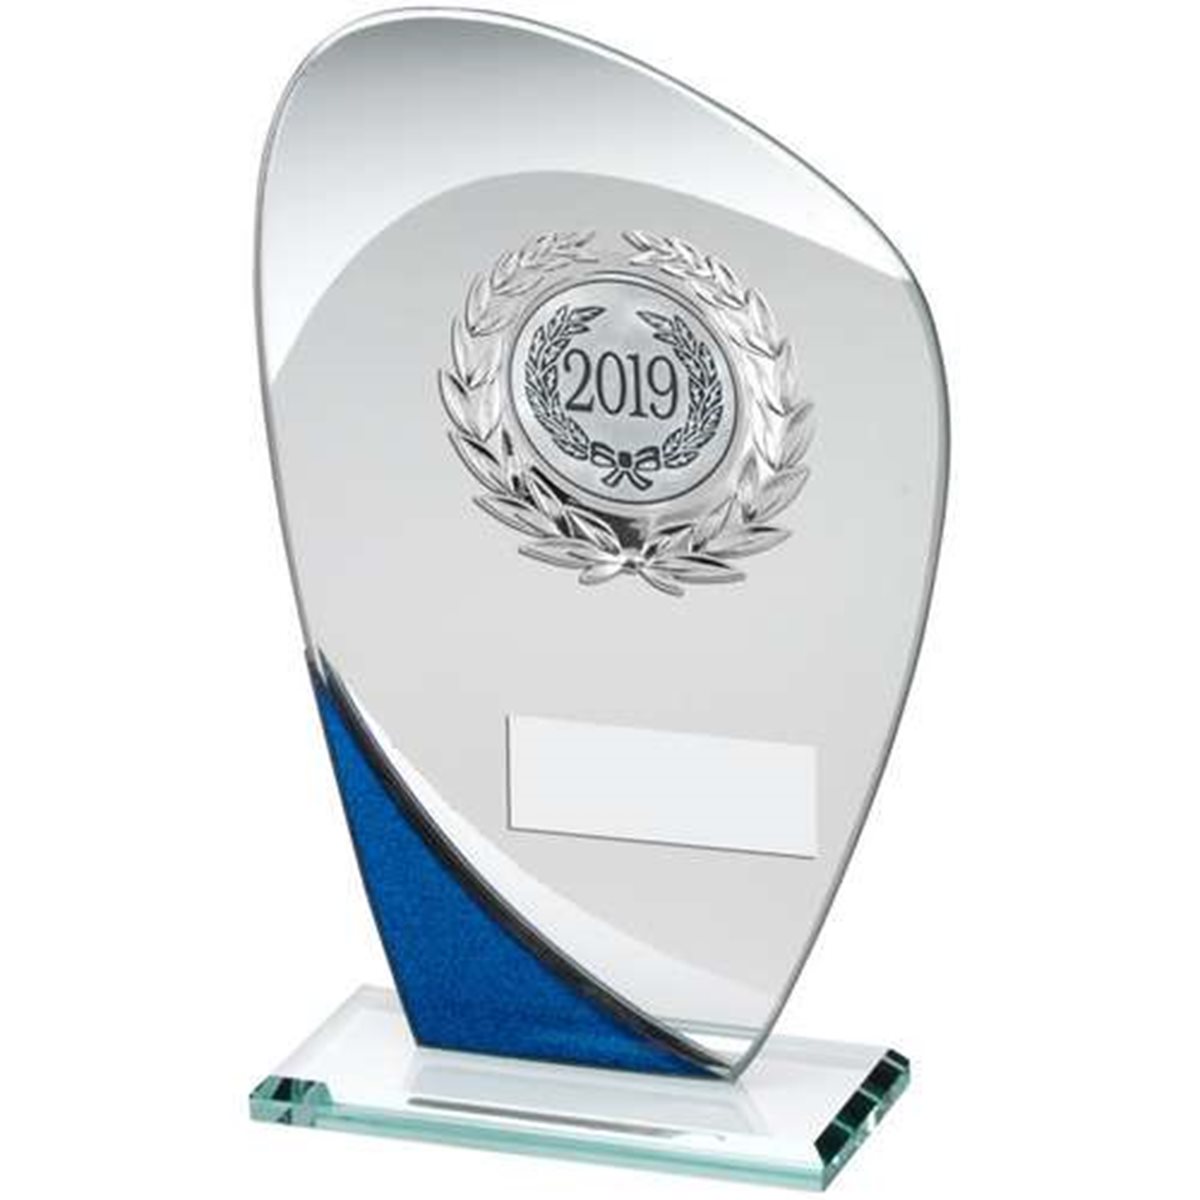 Jade Blue and Silver Glass Award with Silver Trim TY171